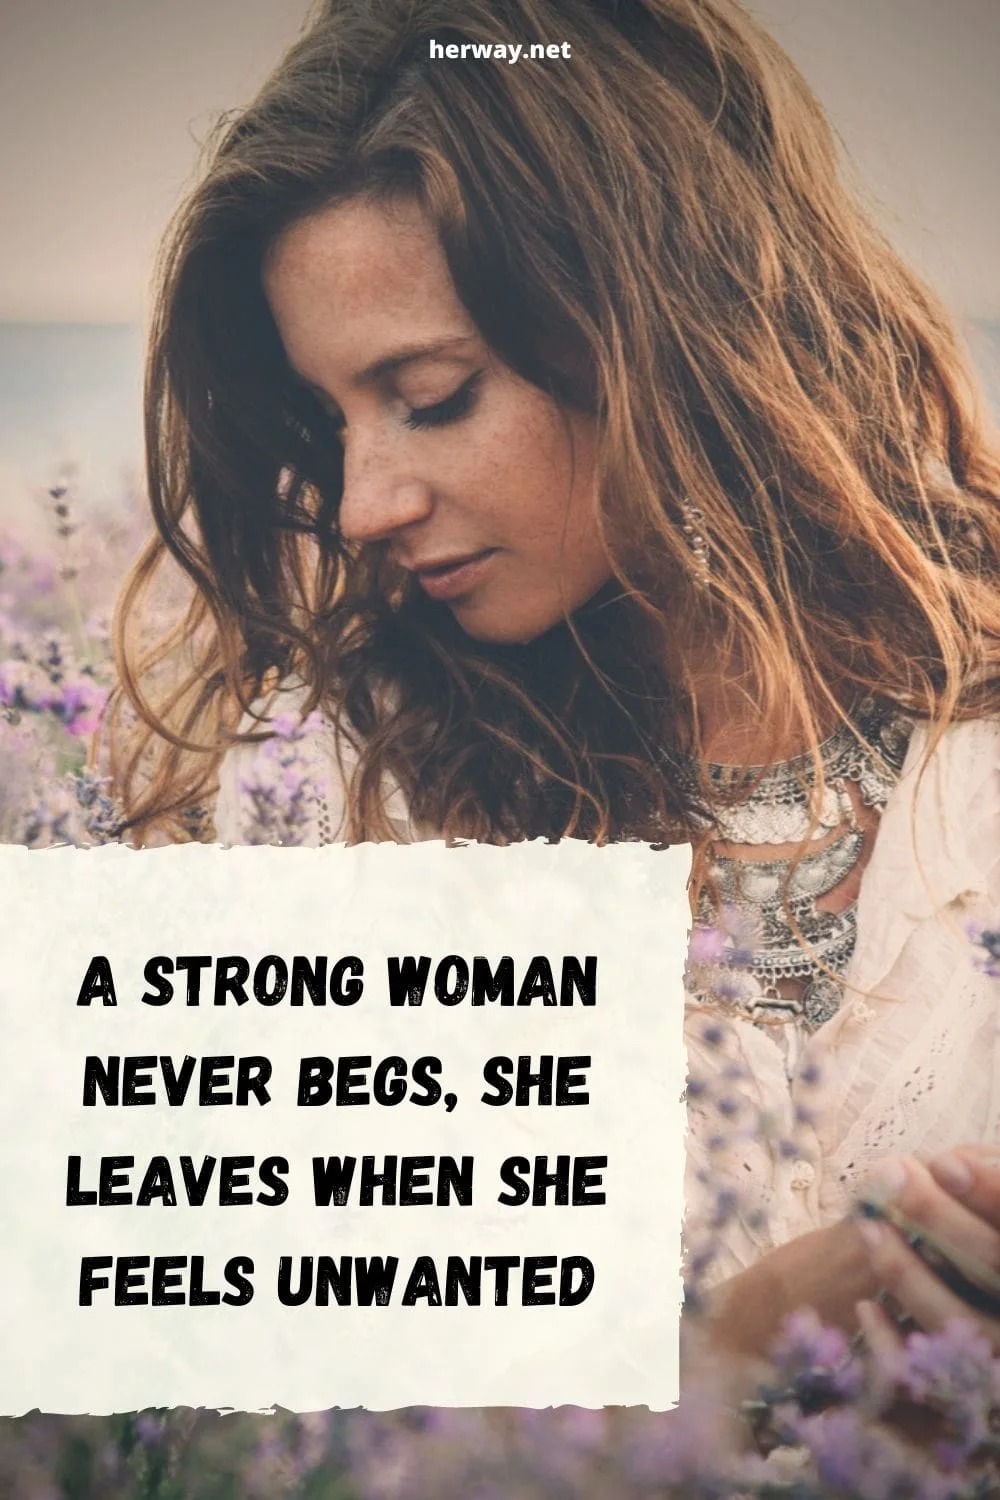 A Strong Woman Never Begs, She Leaves When She Feels Unwanted